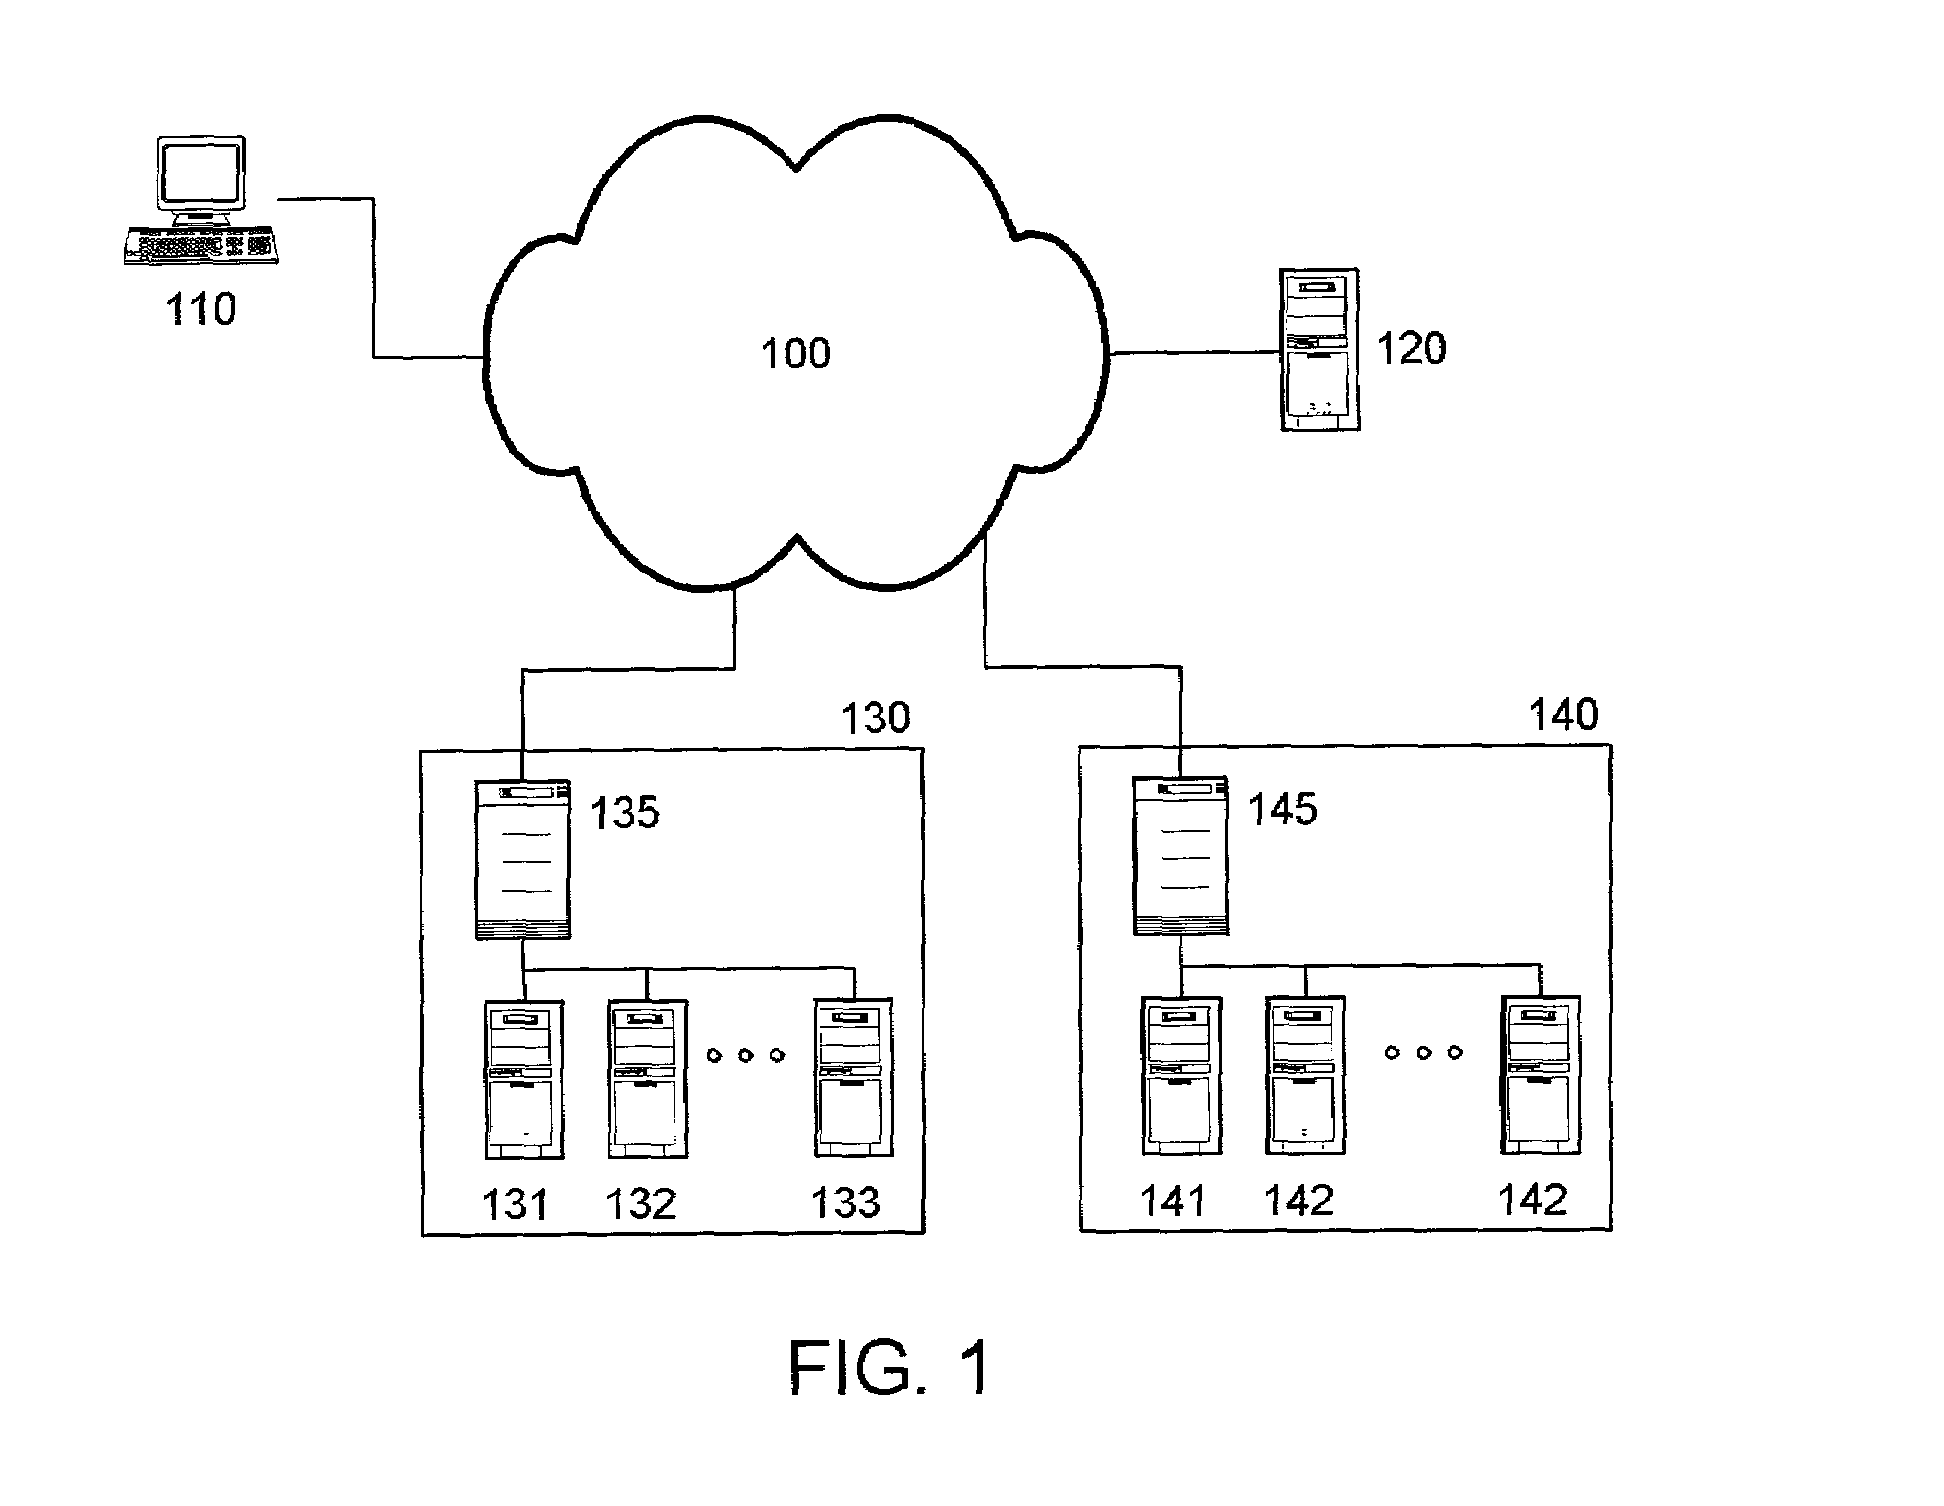 Method for content distribution in a network supporting a security protocol